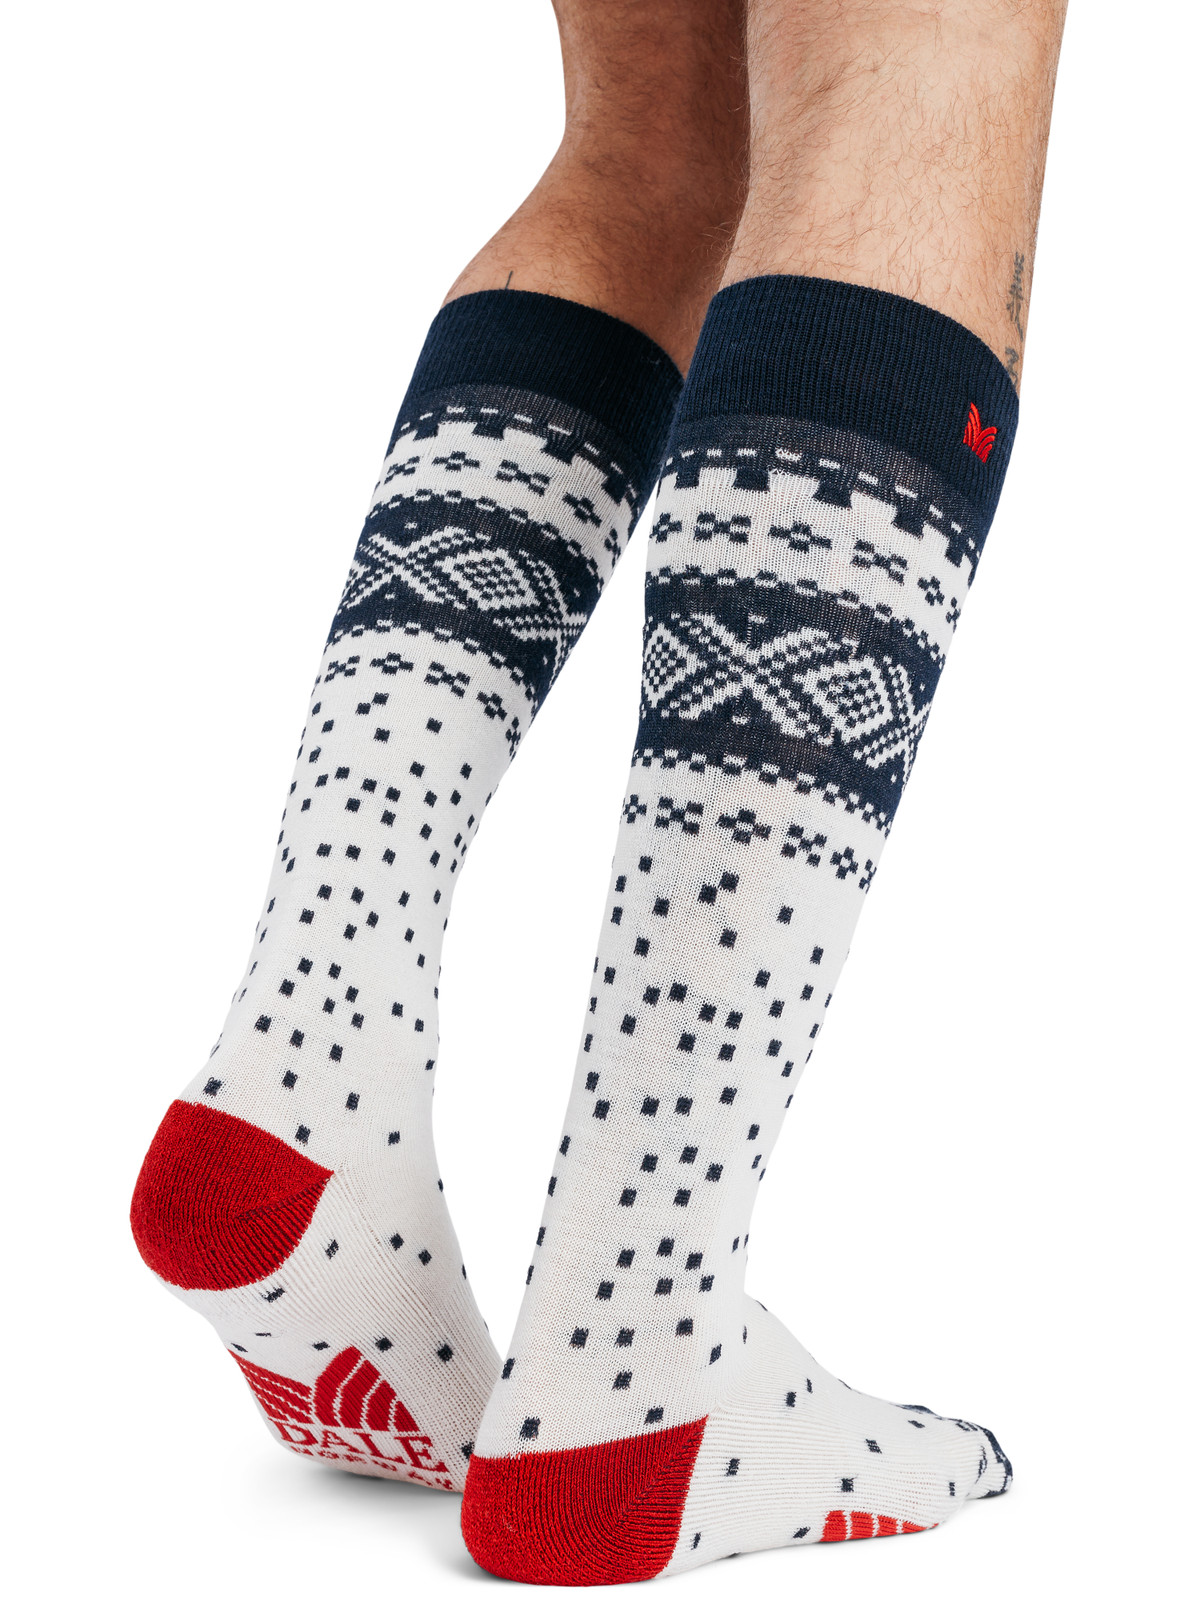 Dale of Norway - Cortina Knee Socks: Off White/Navy/Raspberry, 50111-A_product on feet, back side